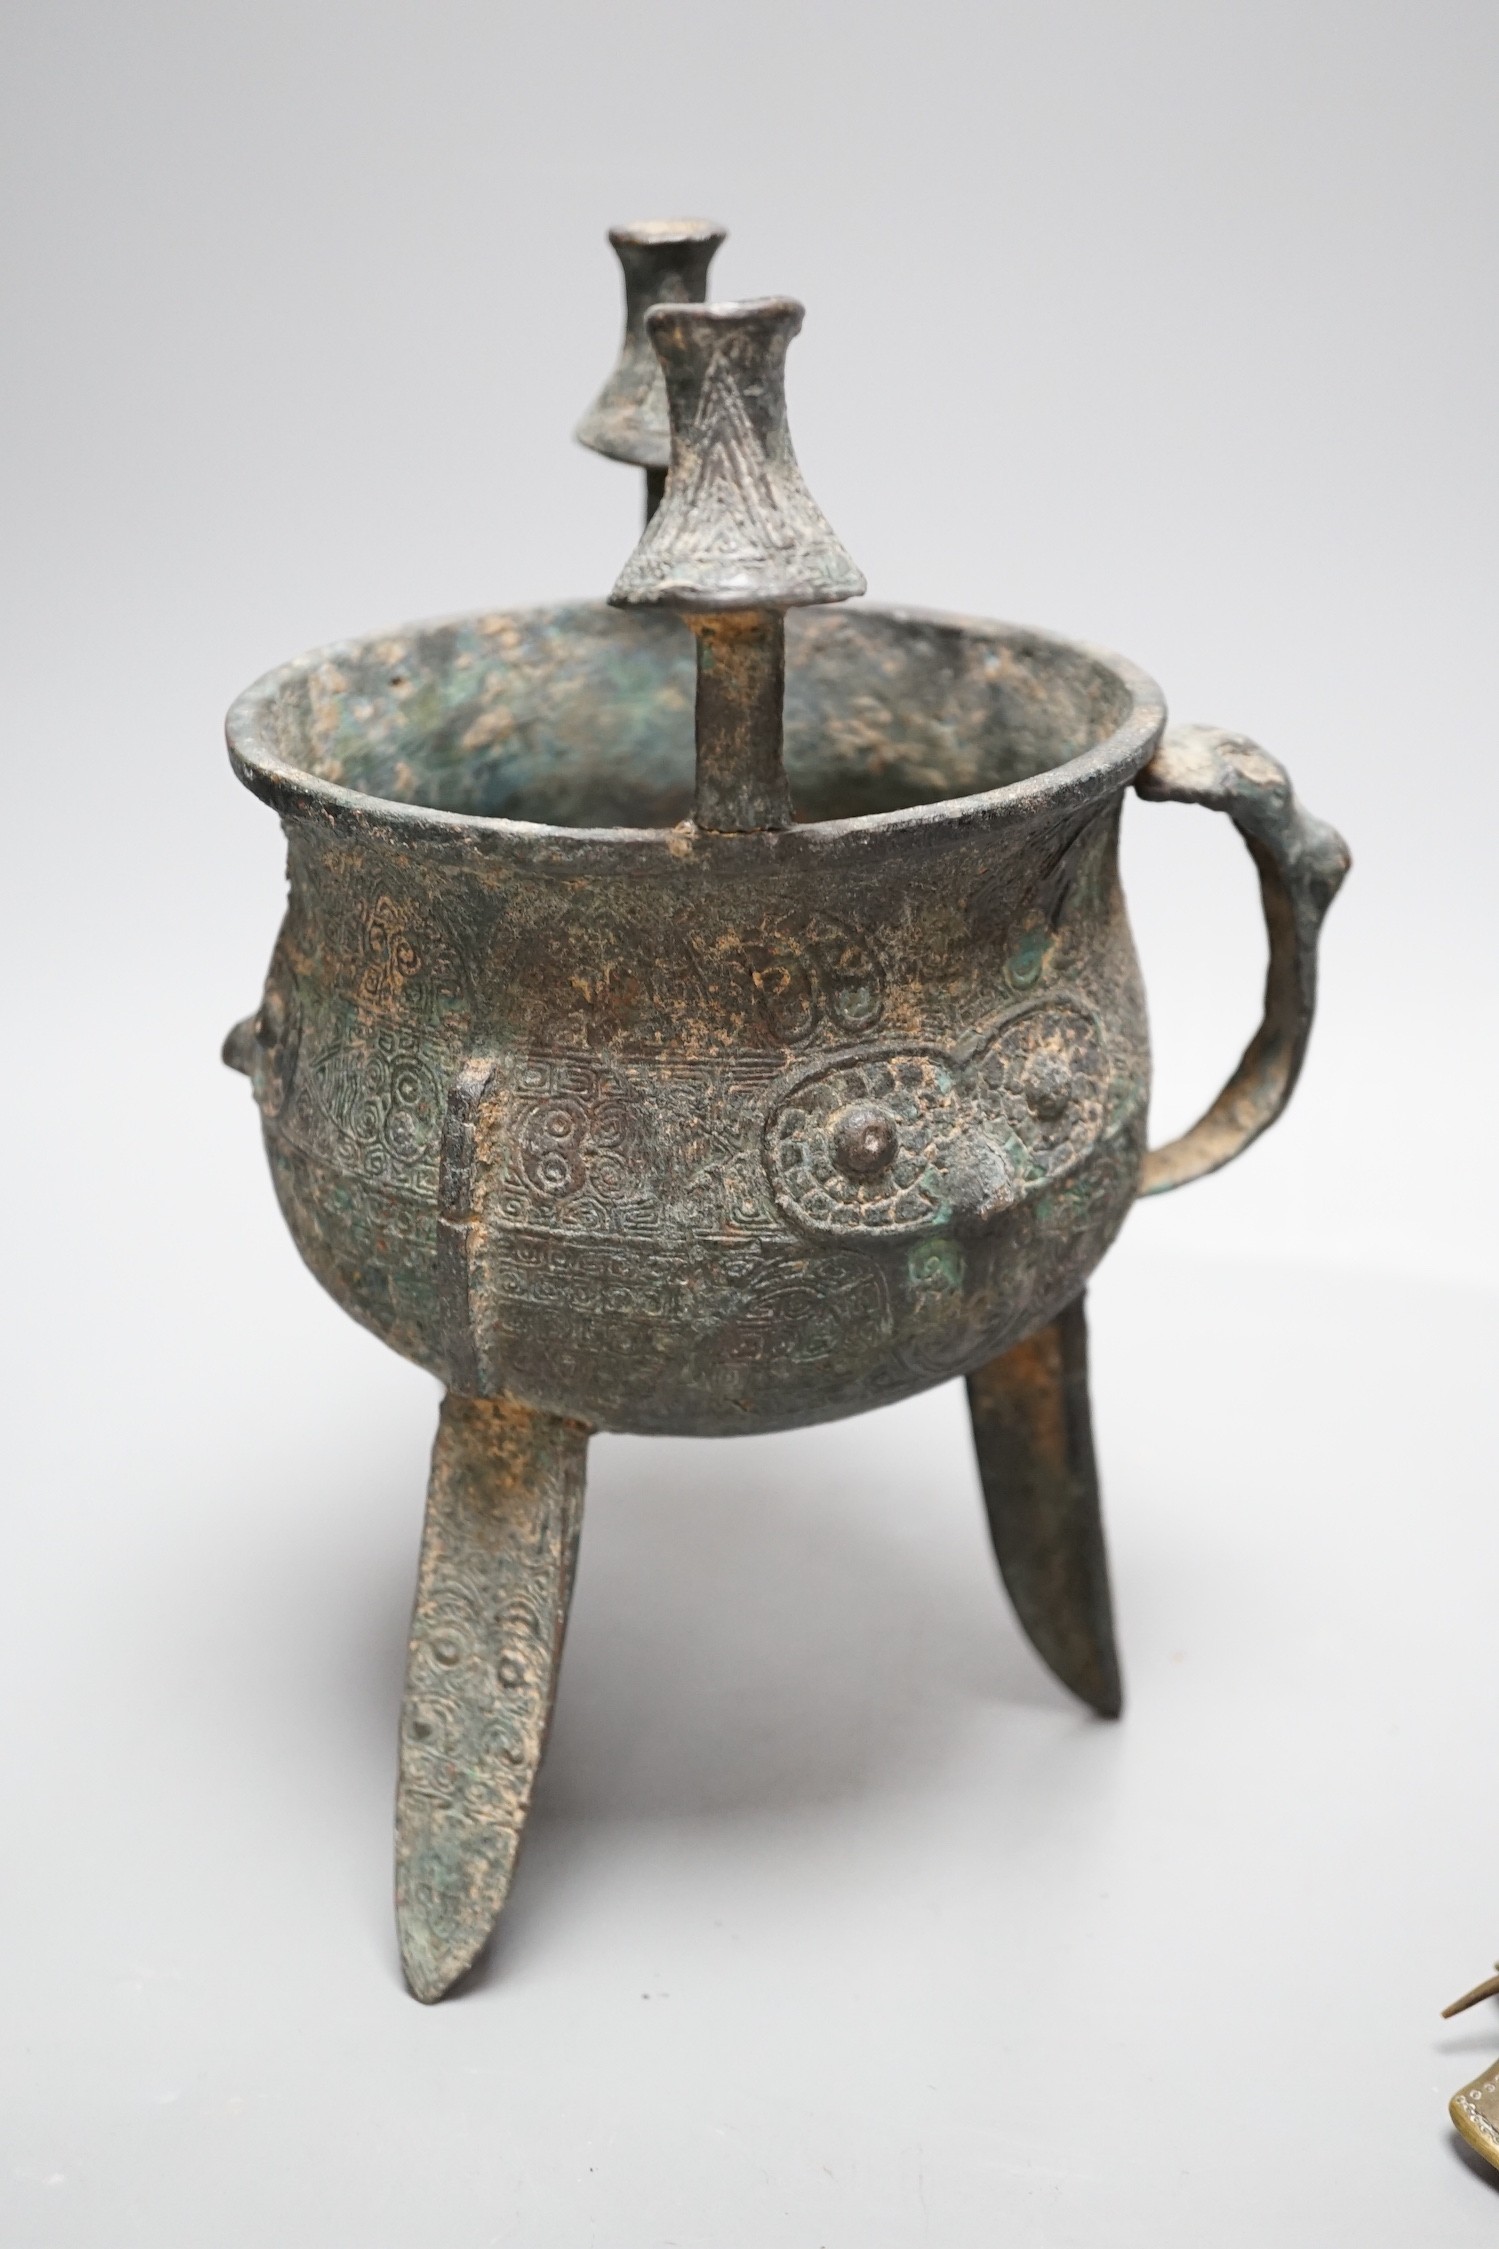 A Chinese green and russet jade belt buckle, an archaistic bronze tripod vessel and a figural bronze. Tallest 25cm